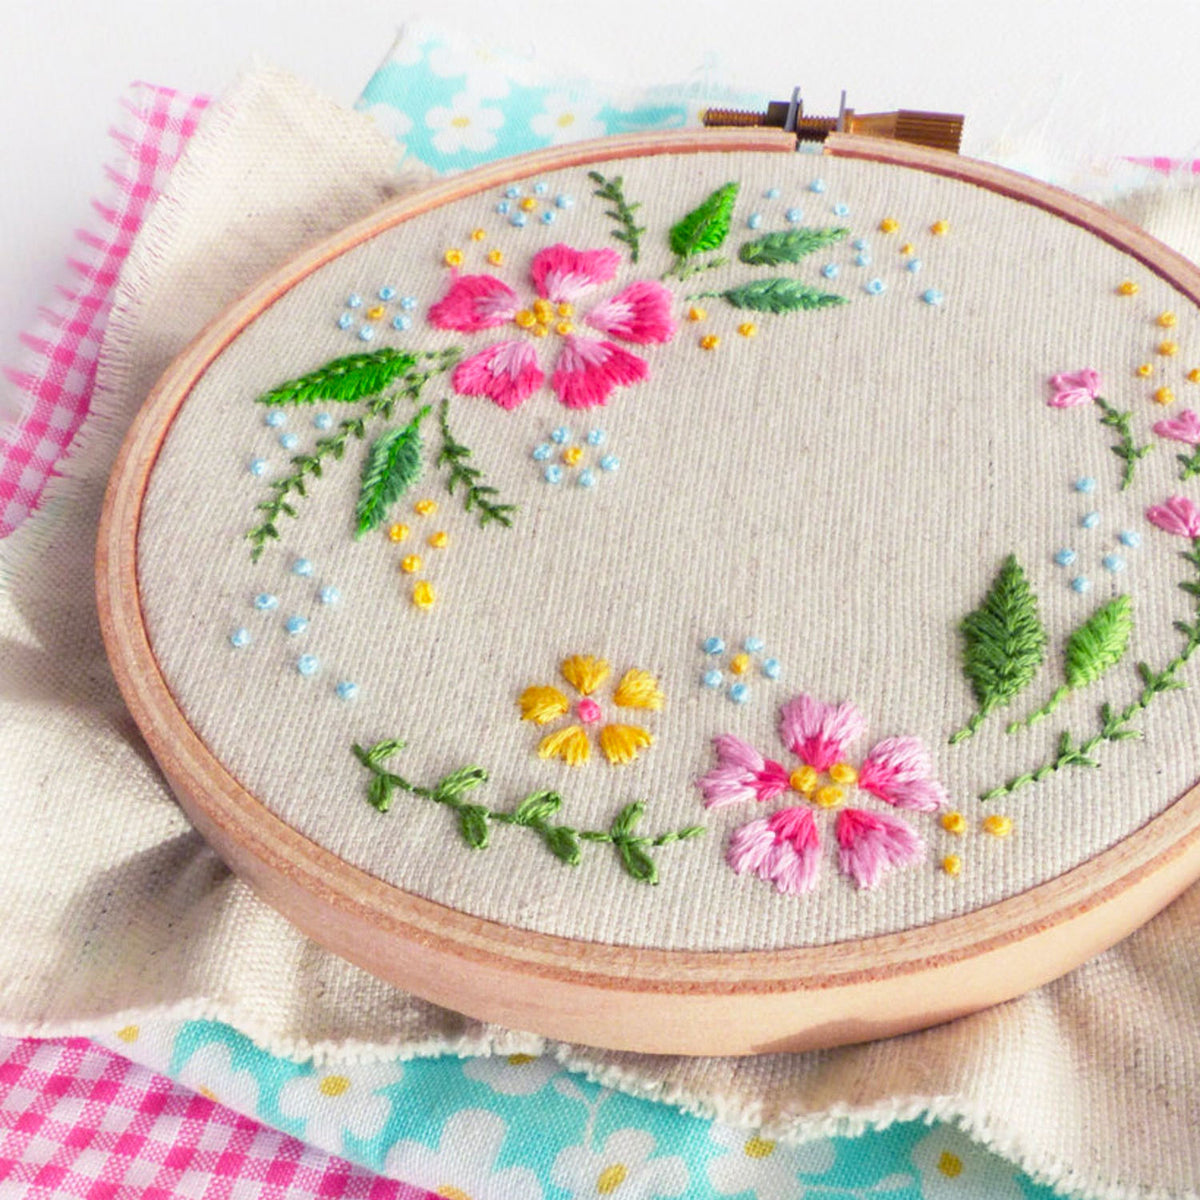 Embroidery Kit Beginner Embroidery Hoop Art Hand Embroidery Kit